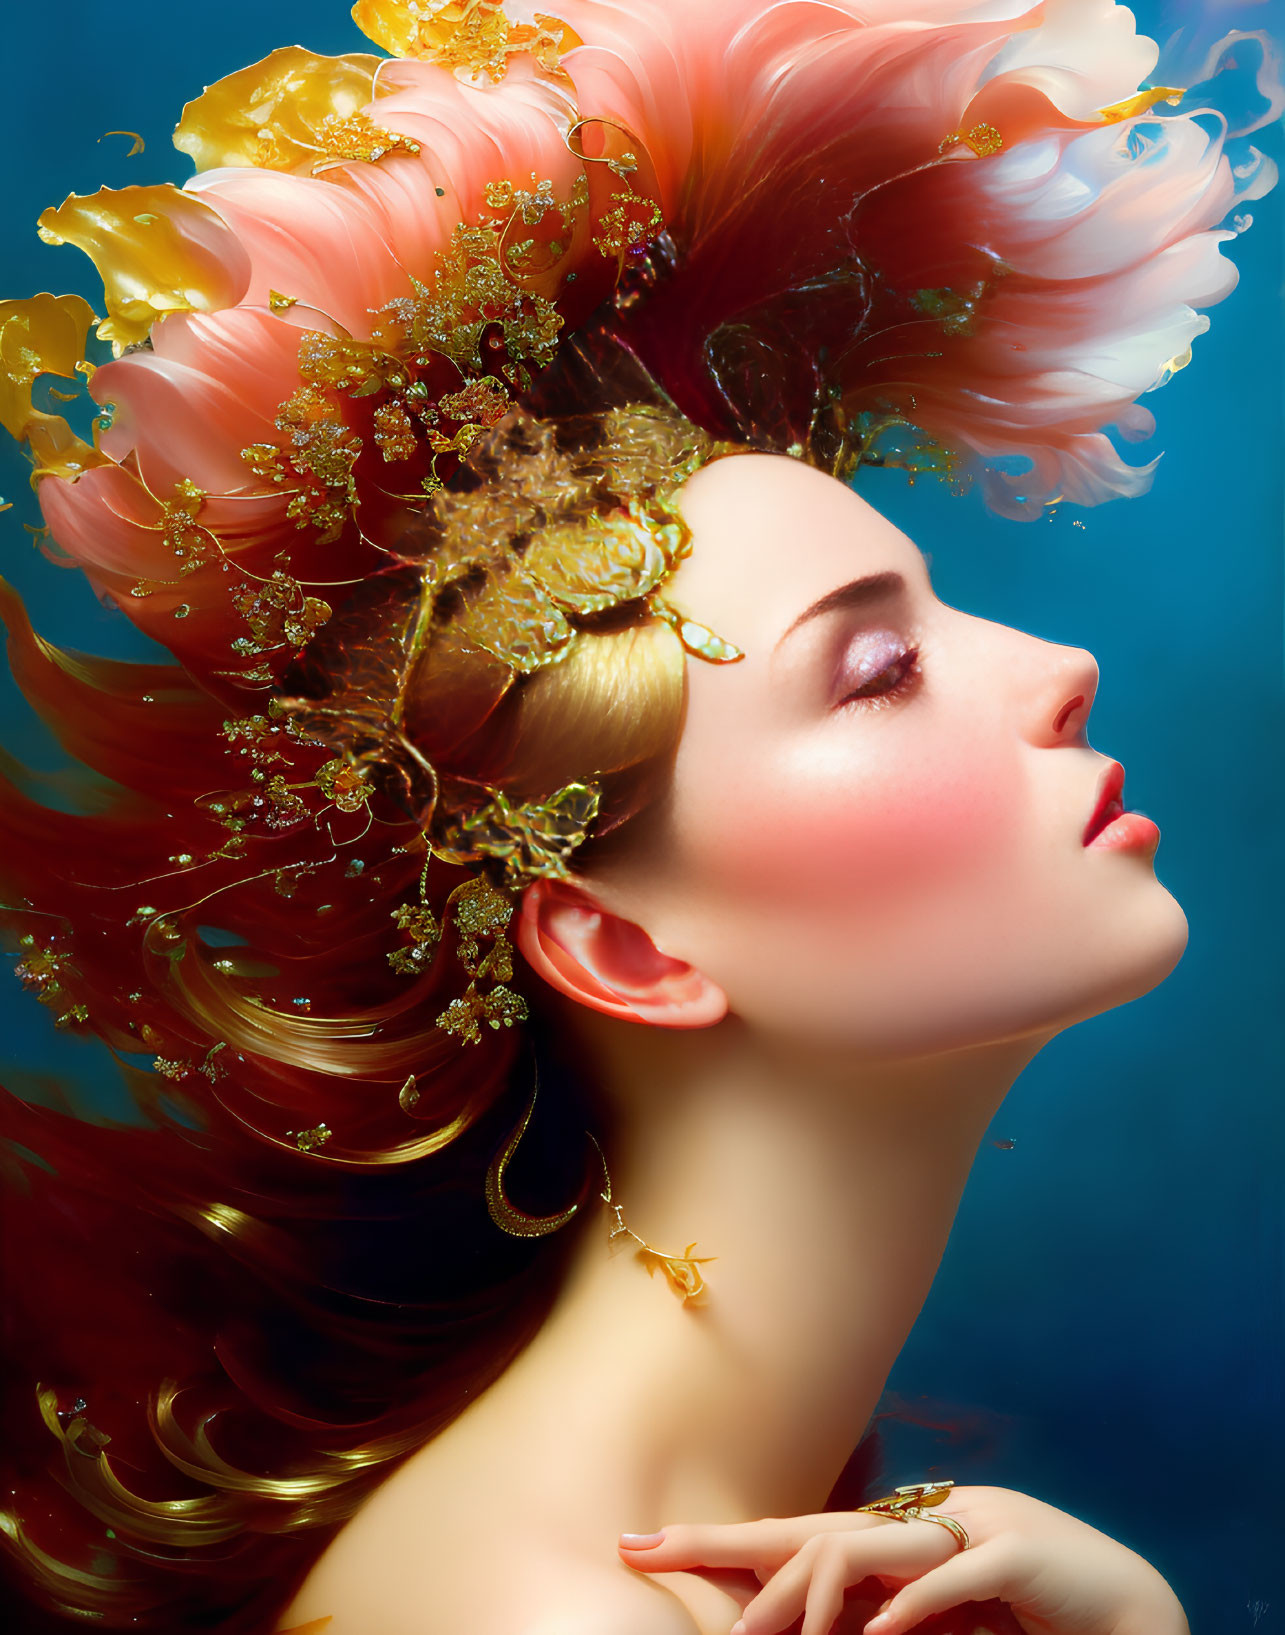 Profile of Woman with Red Hair and Floral Headpiece on Blue Background